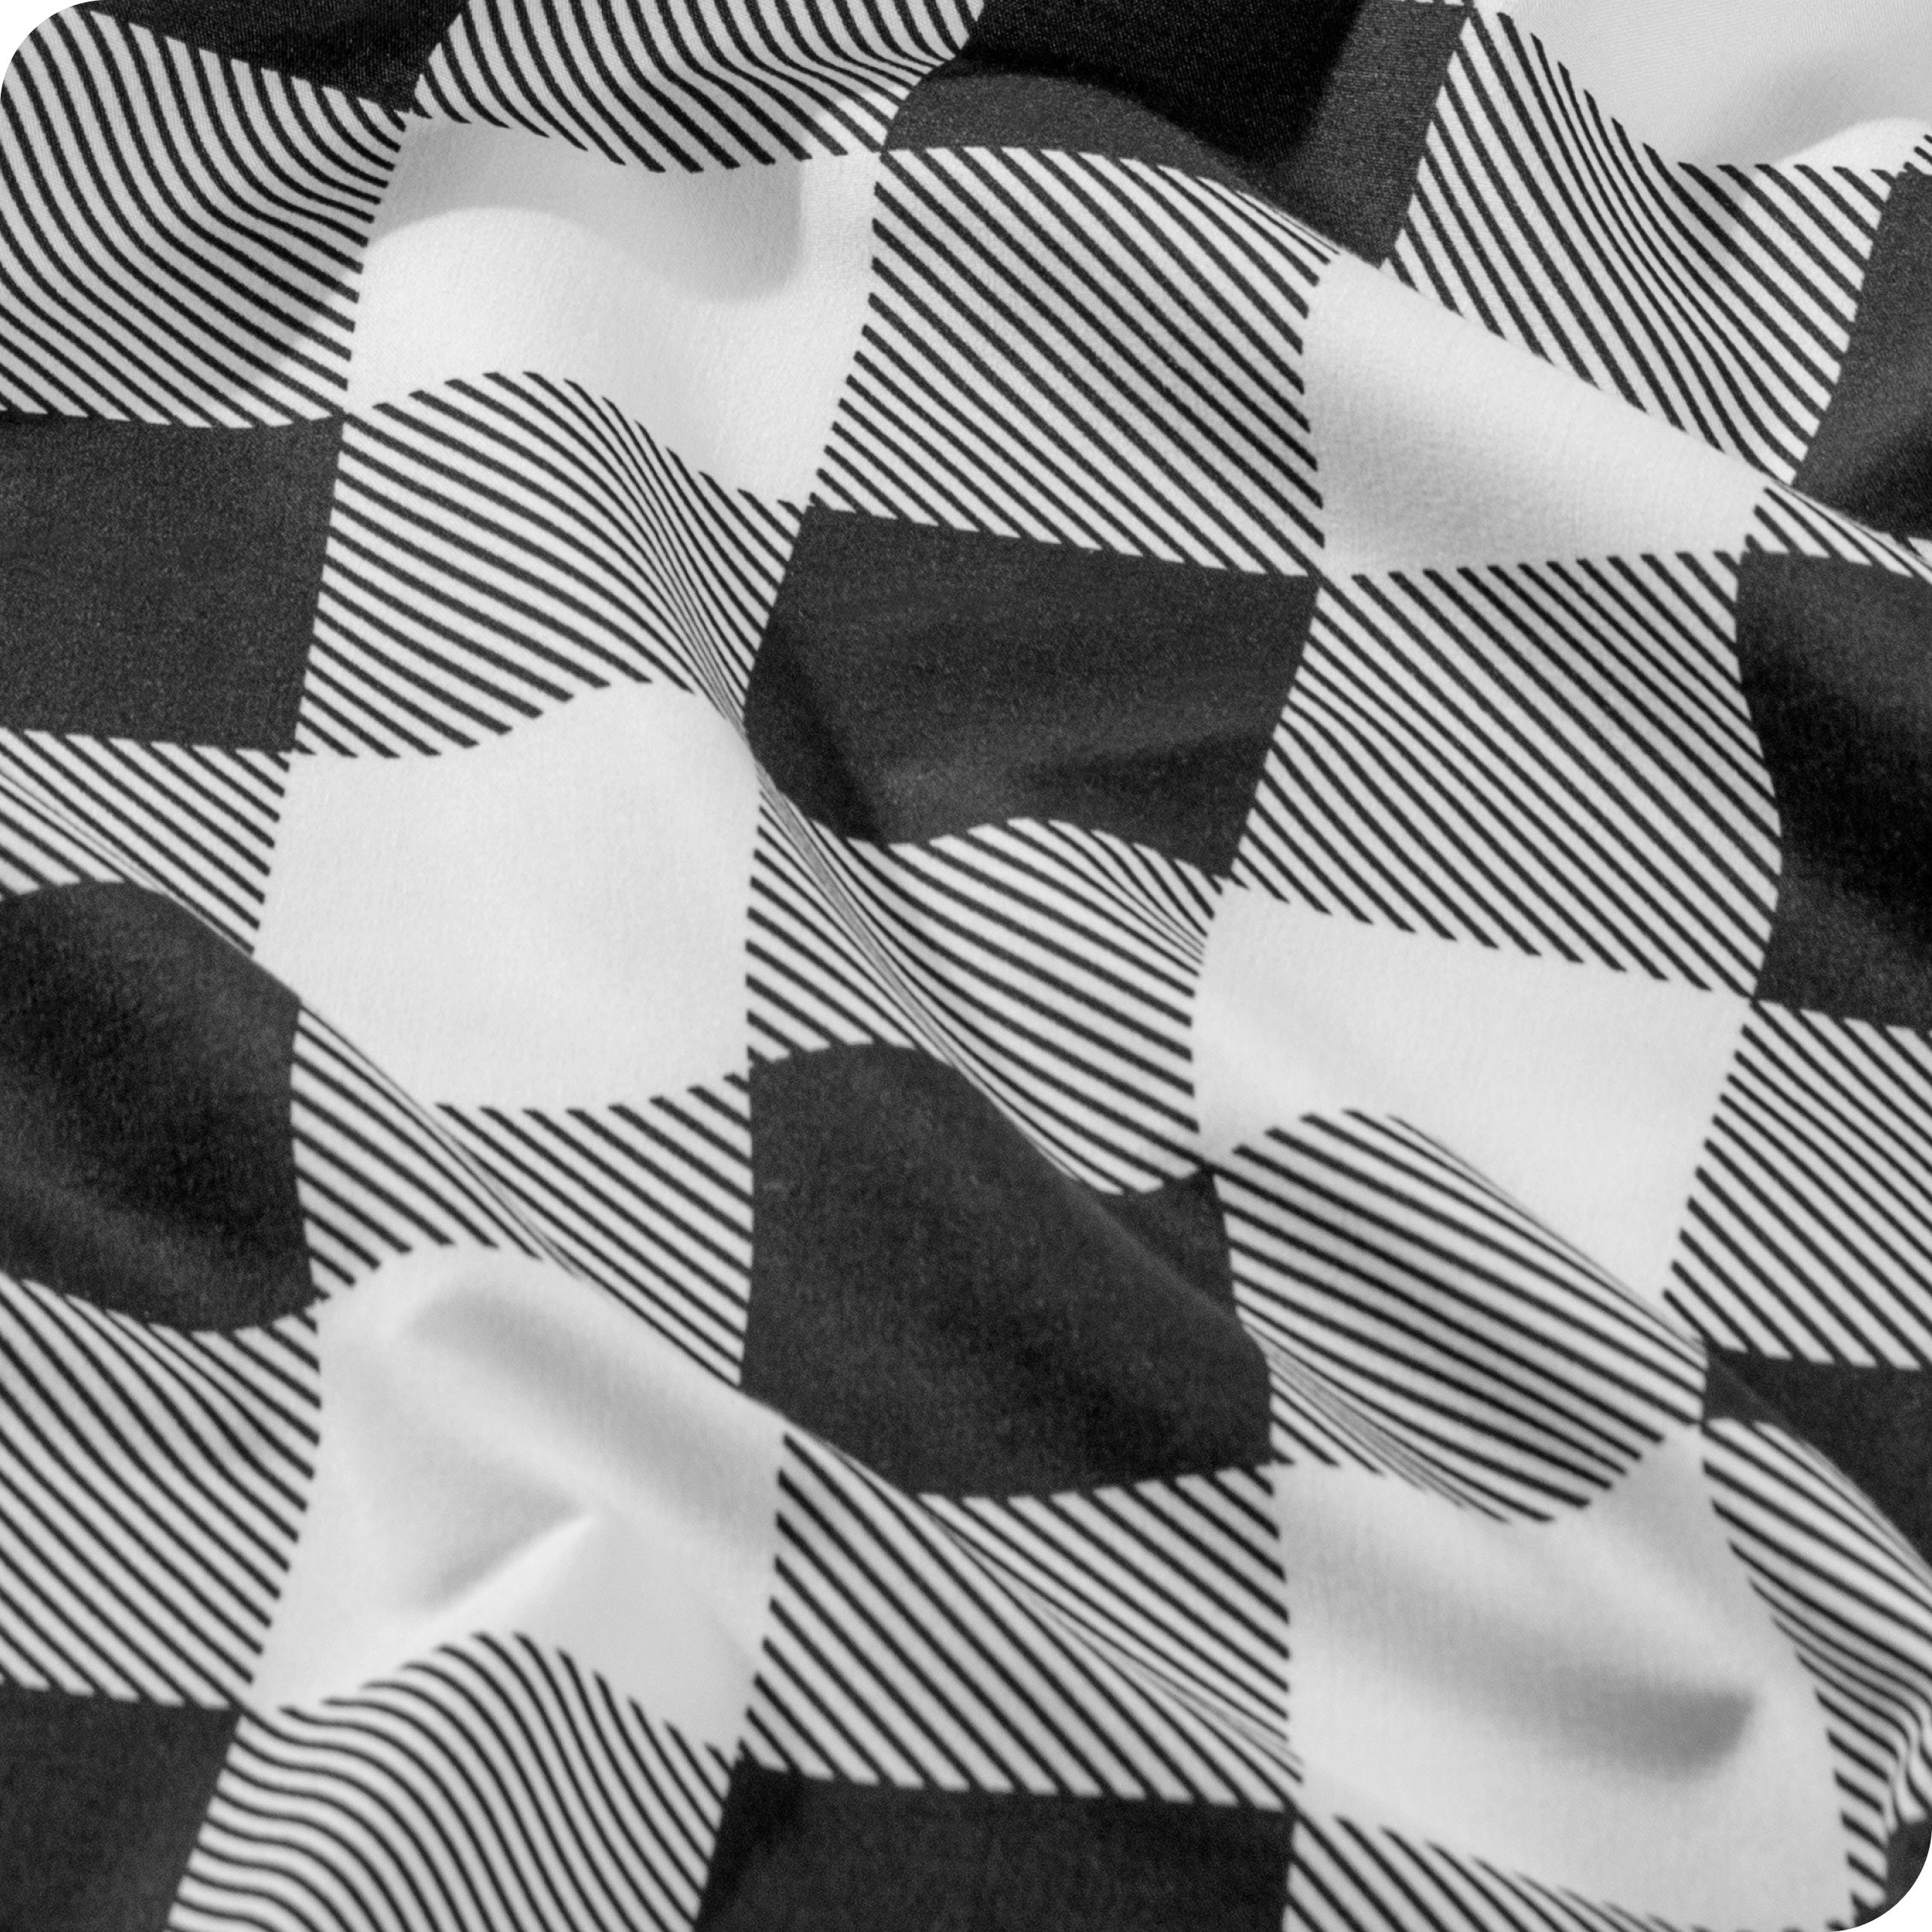 A close up view showing the pattern and texture of the microfiber sheet.